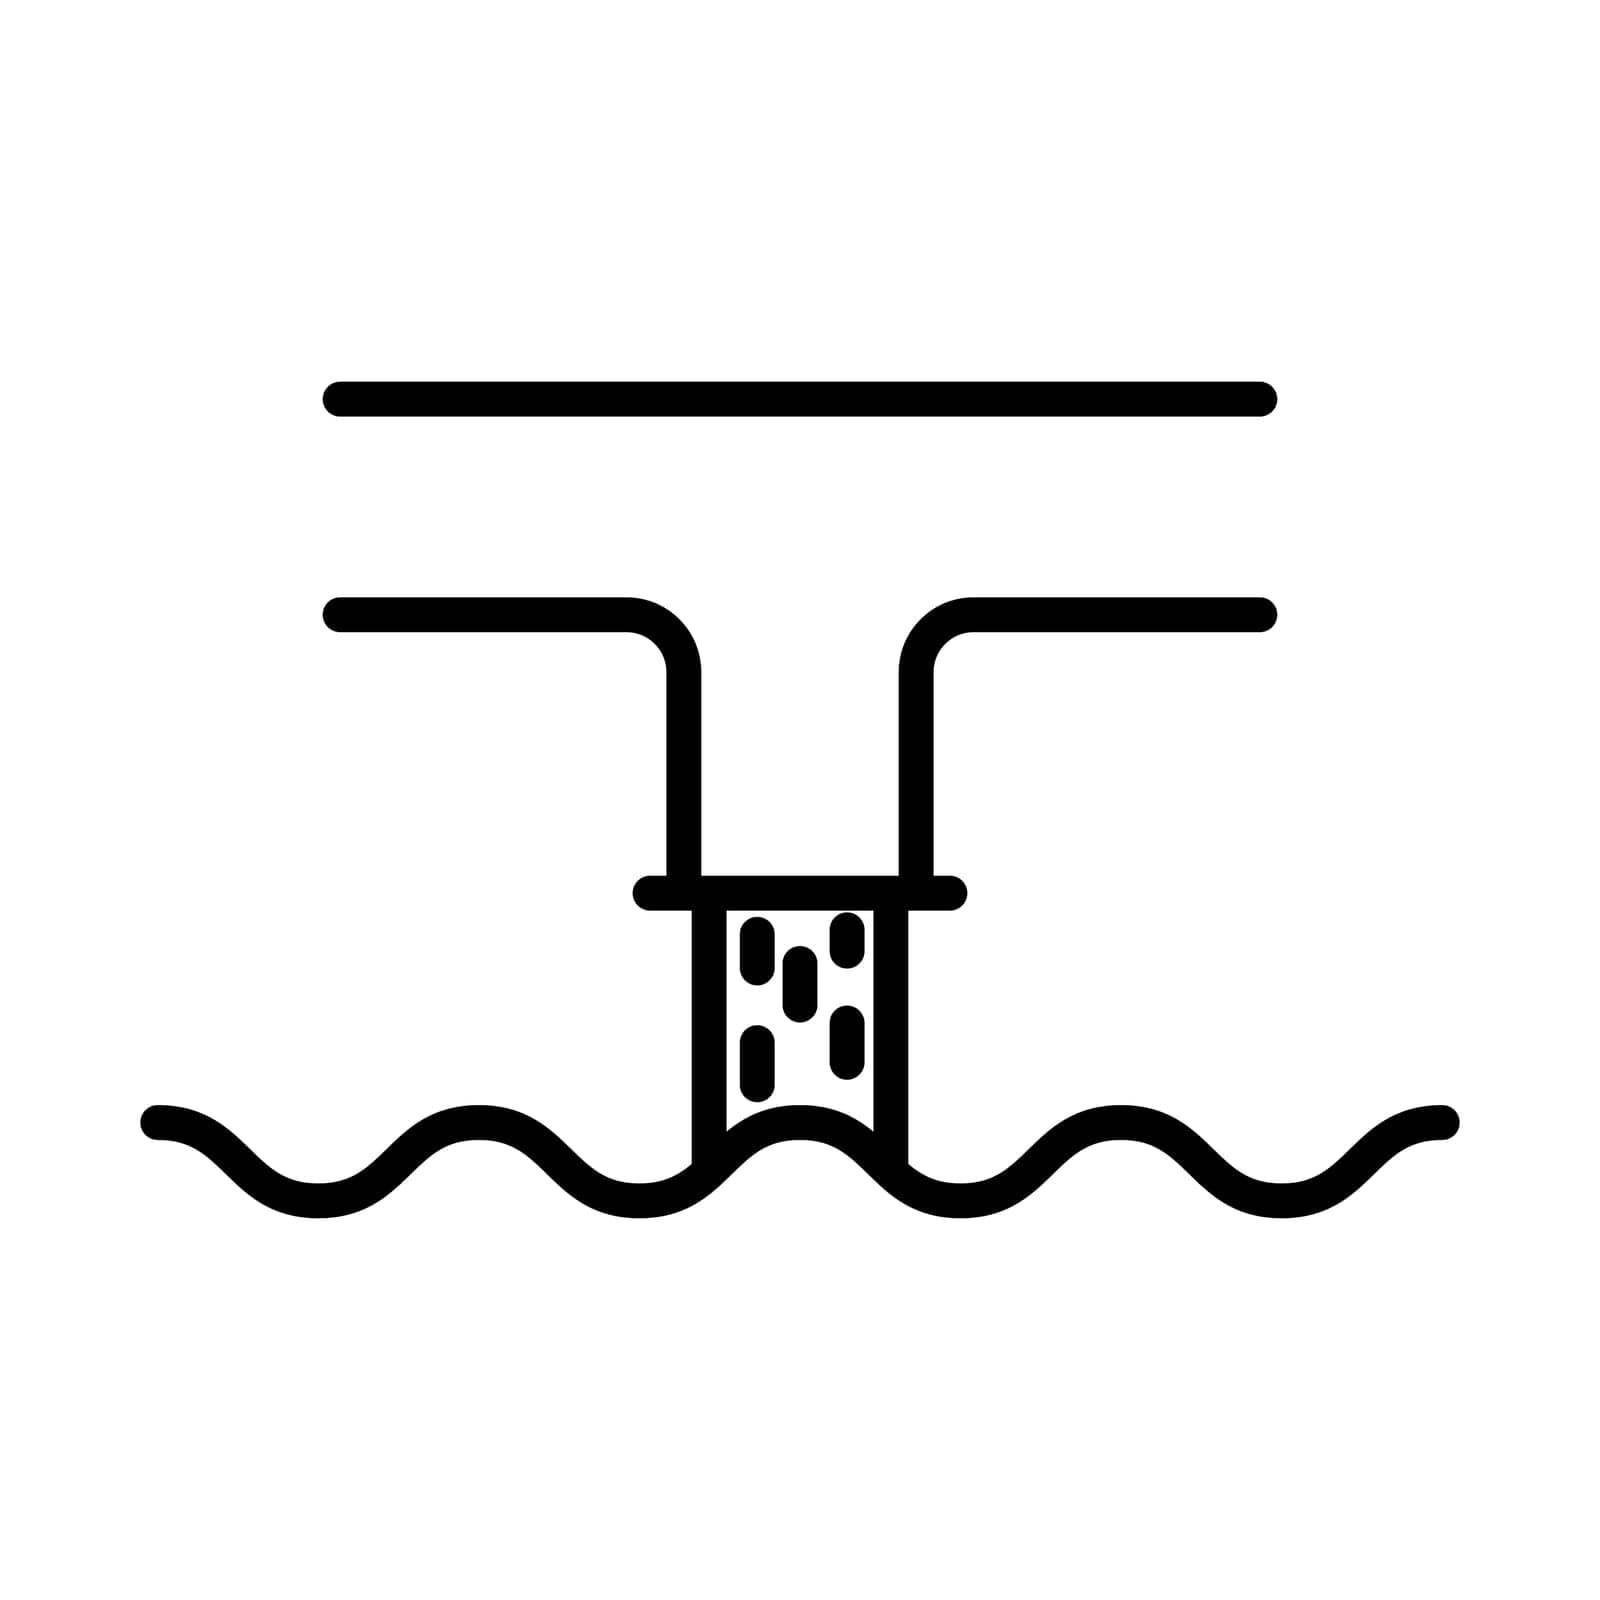 Water Pollution outline vector icon isolated